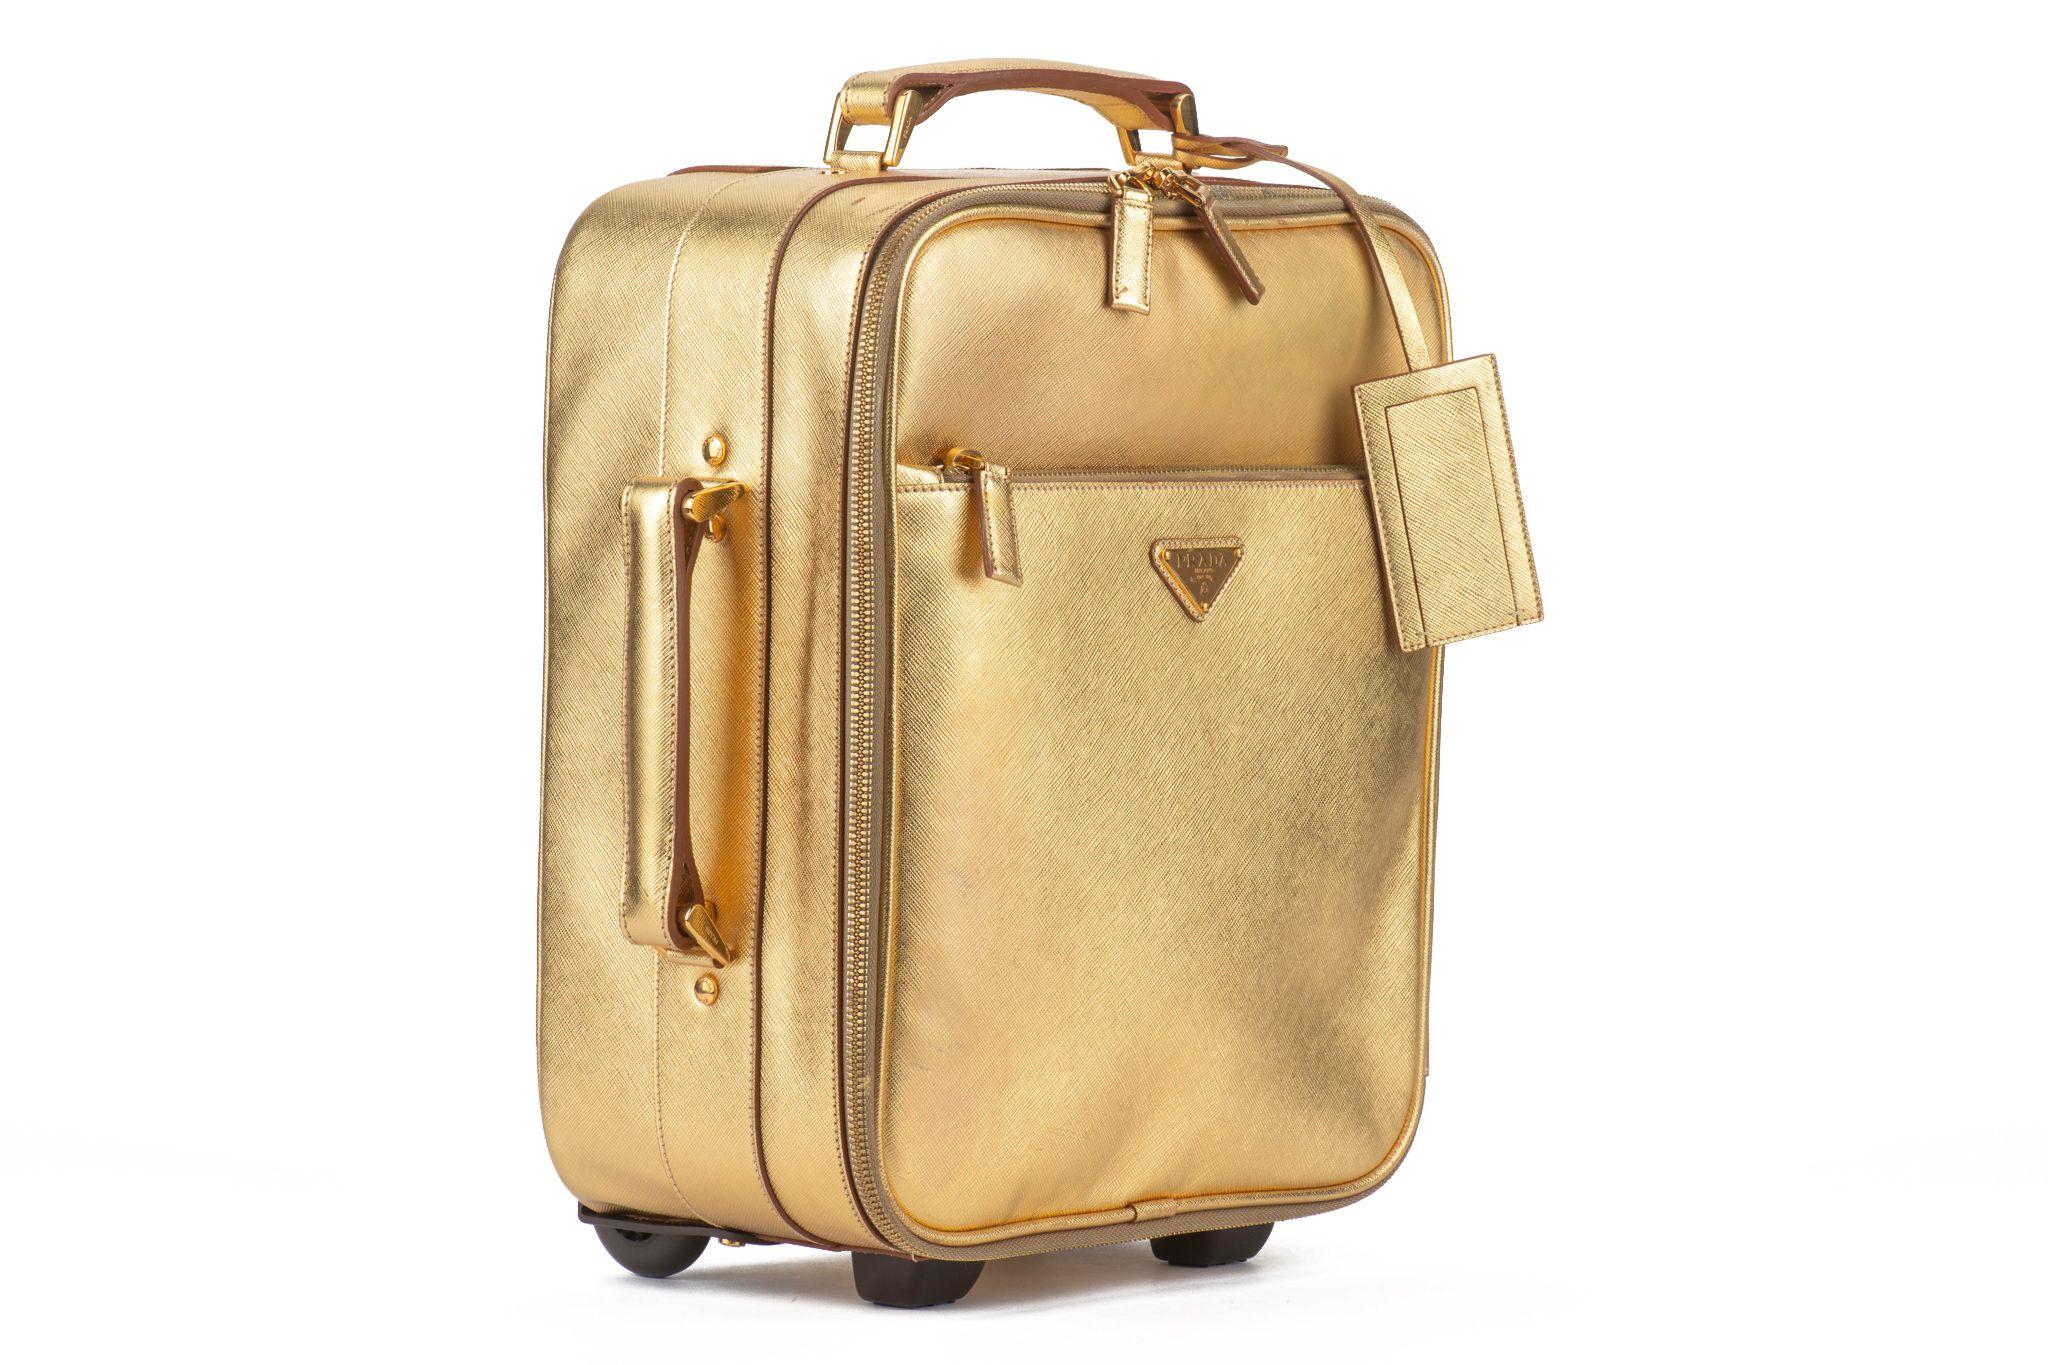 Prada Gold Saffiano Small Carry On Bag In Good Condition For Sale In West Hollywood, CA